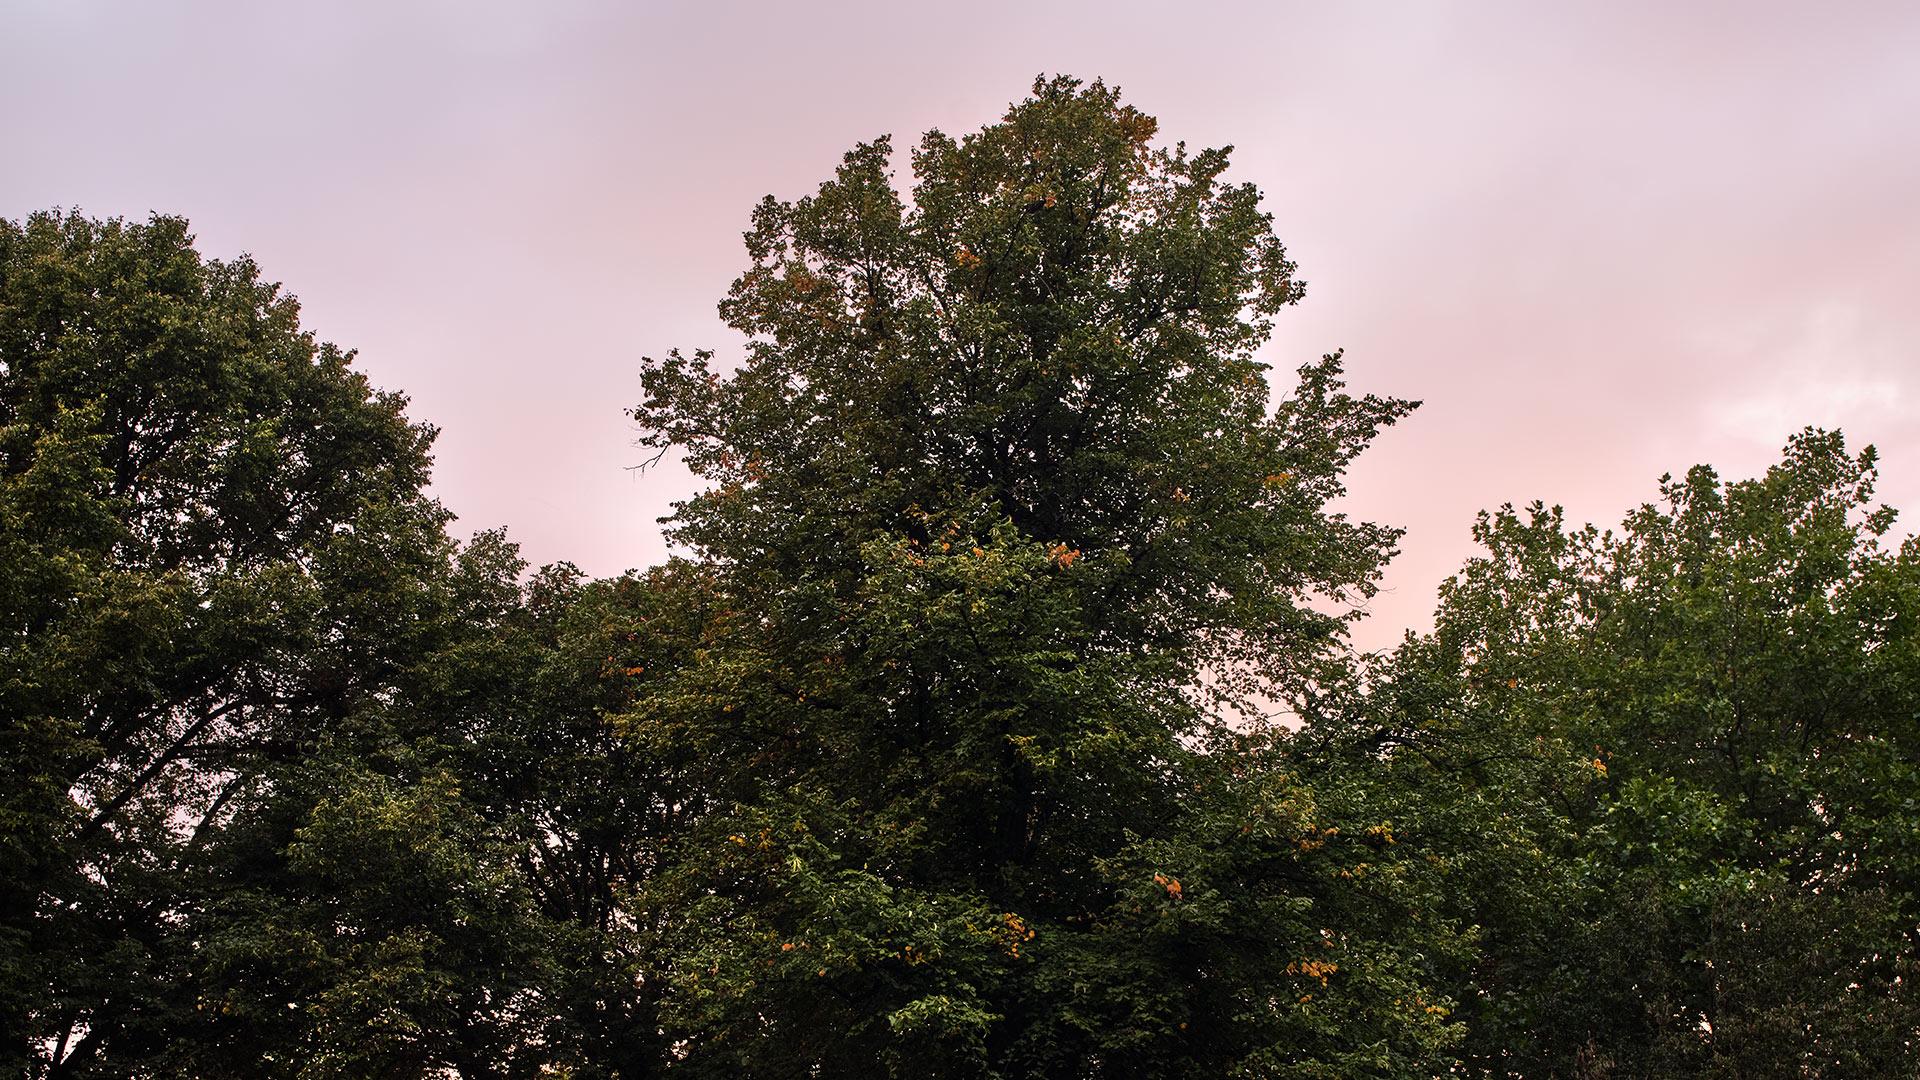 Partial image of the top of several green forest trees with a pink sky